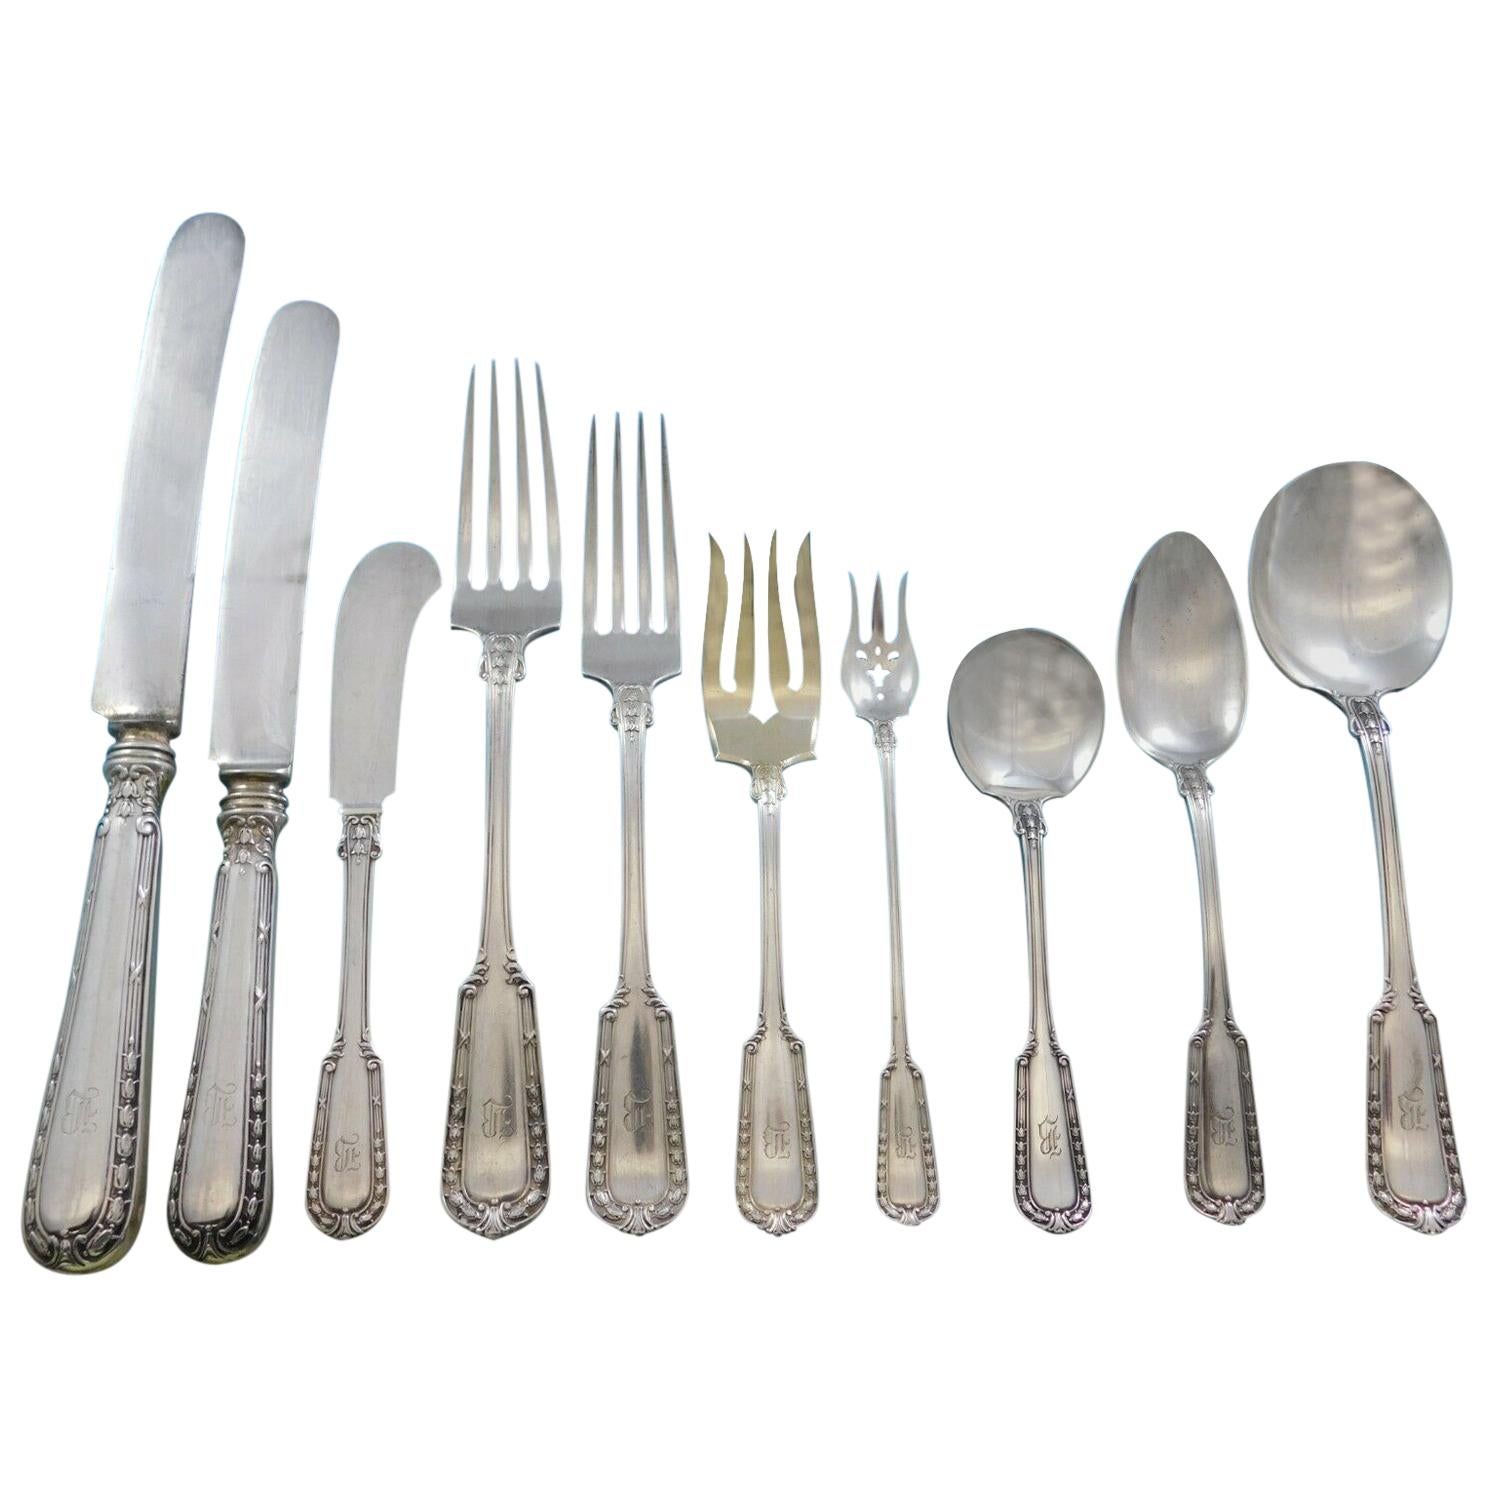 Chesterfield by Gorham Sterling Silver Flatware Set 8 Service 117 Pcs B Monogram For Sale